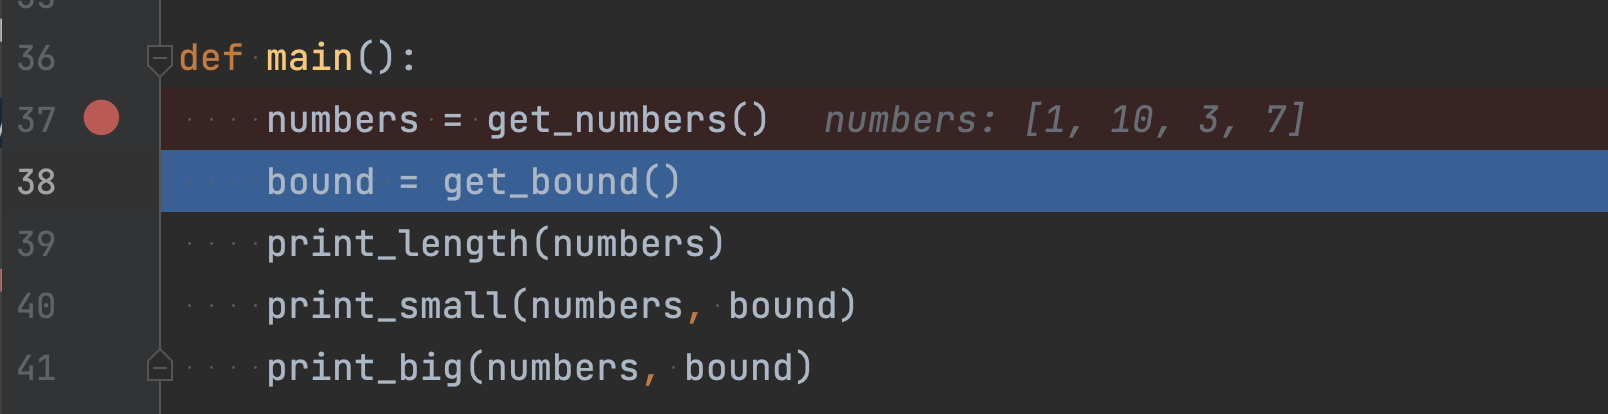 get_numbers() returns a list of numbers -- 1, 10, 3, 7